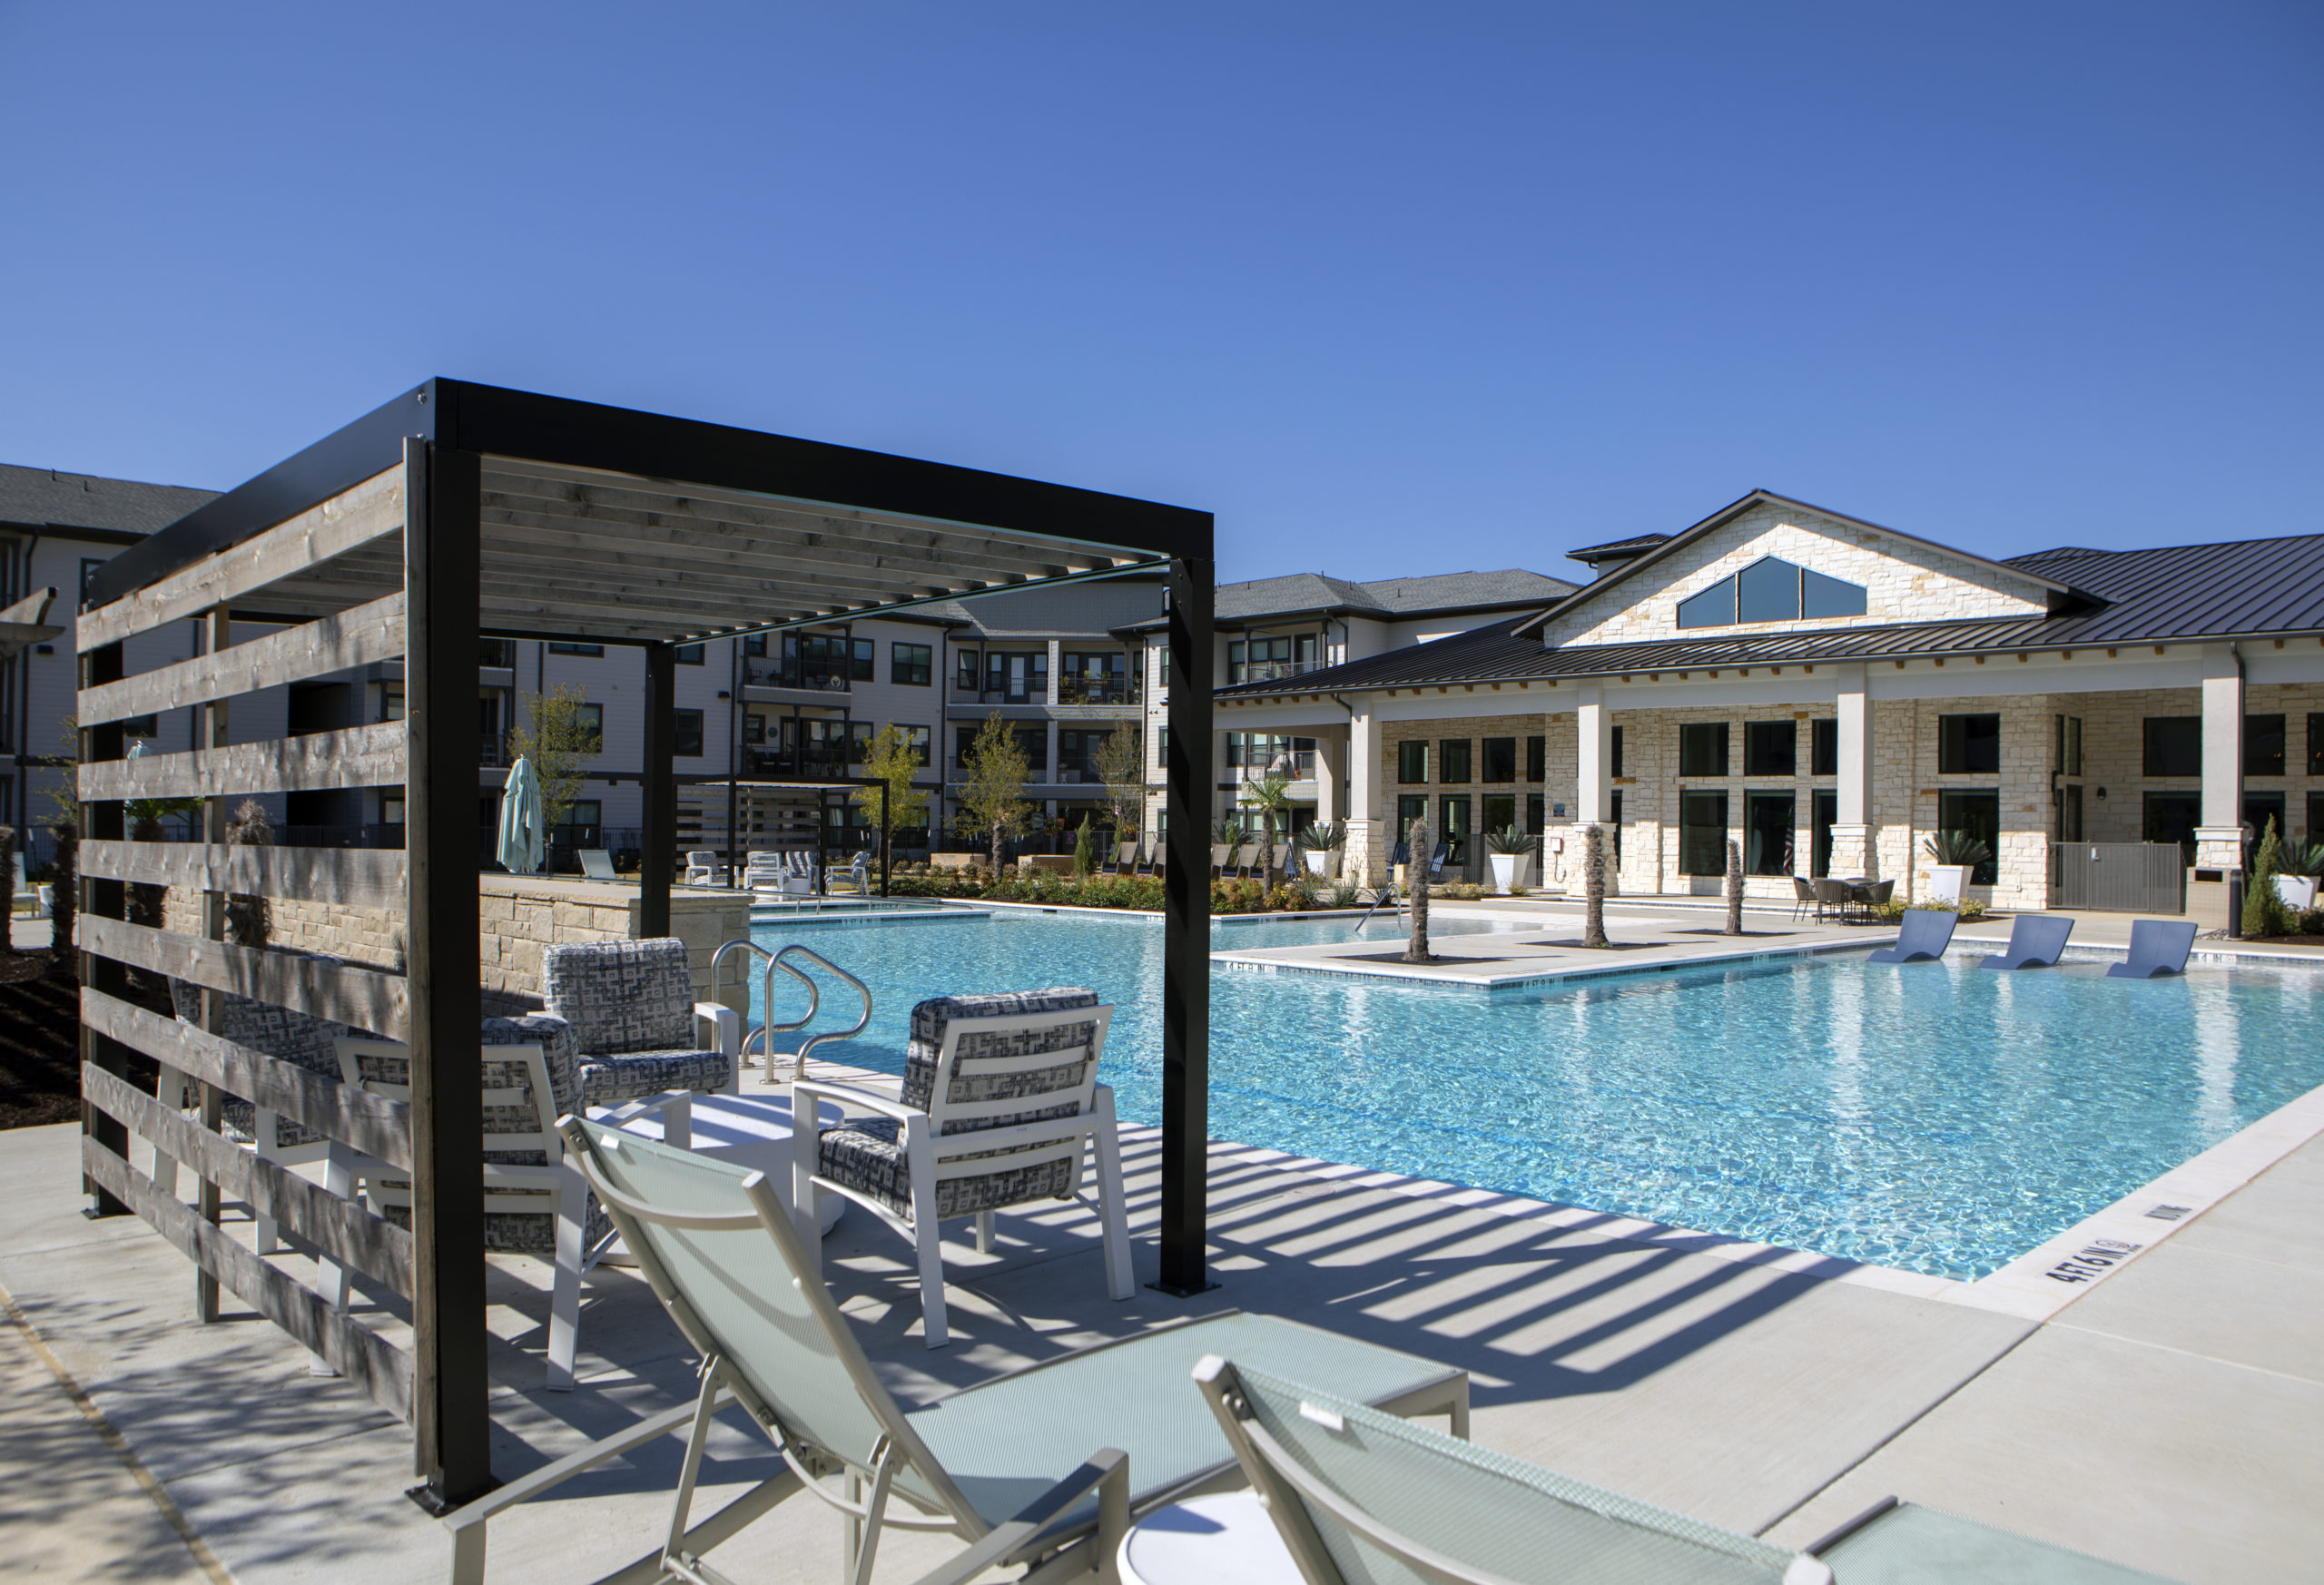 Resort style pool with sun deck at Solea Keller Apartments in Fort Worth Texas